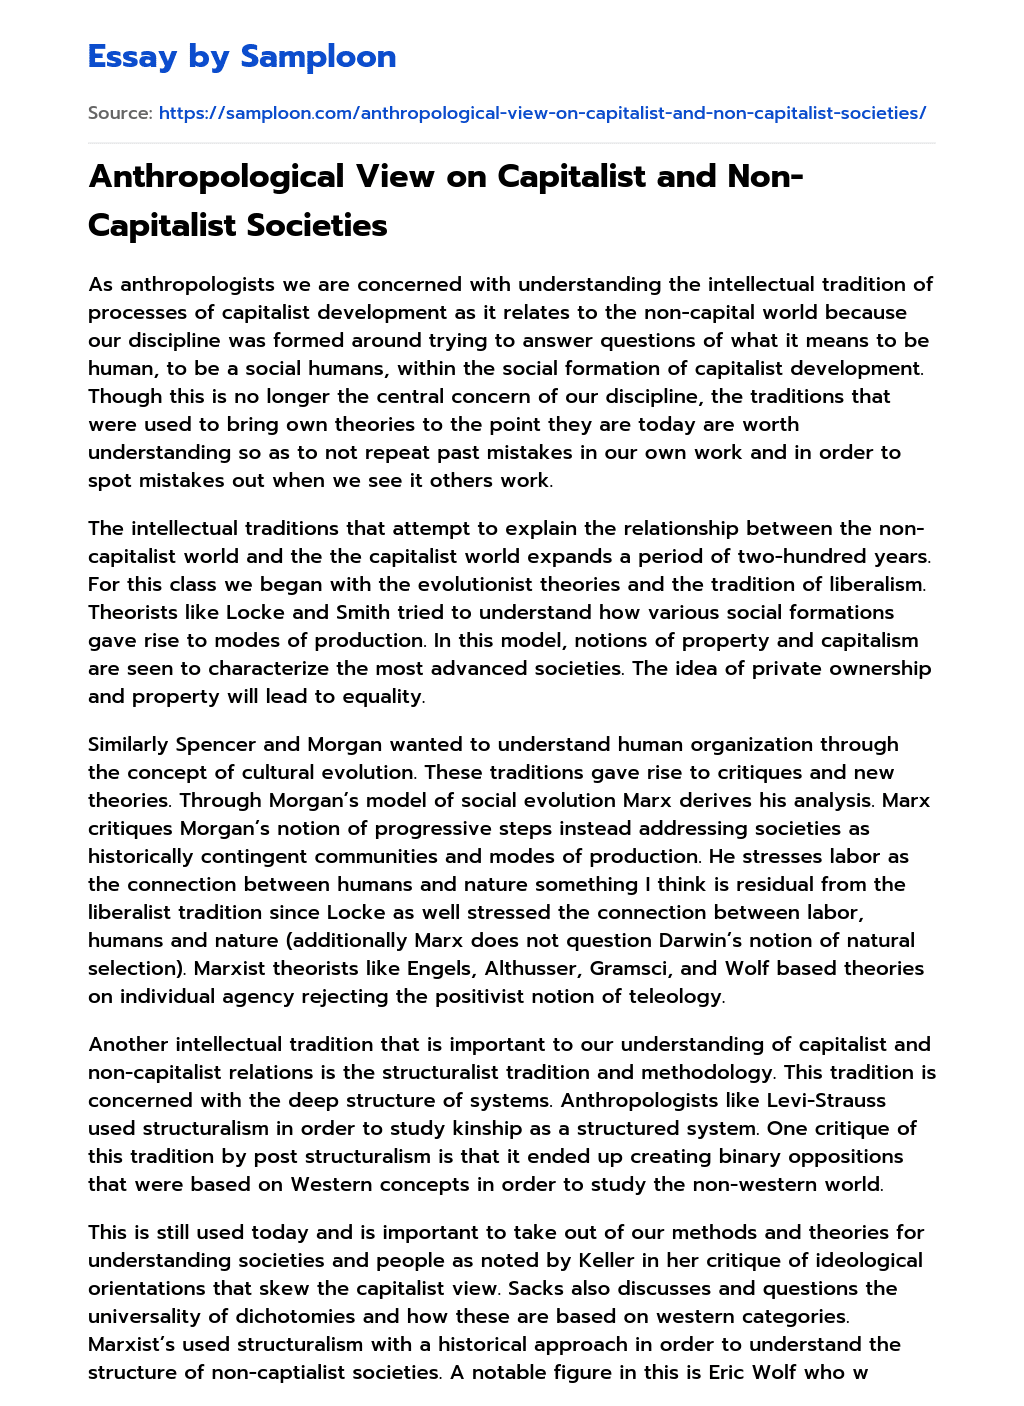 Anthropological View on Capitalist and Non-Capitalist Societies essay